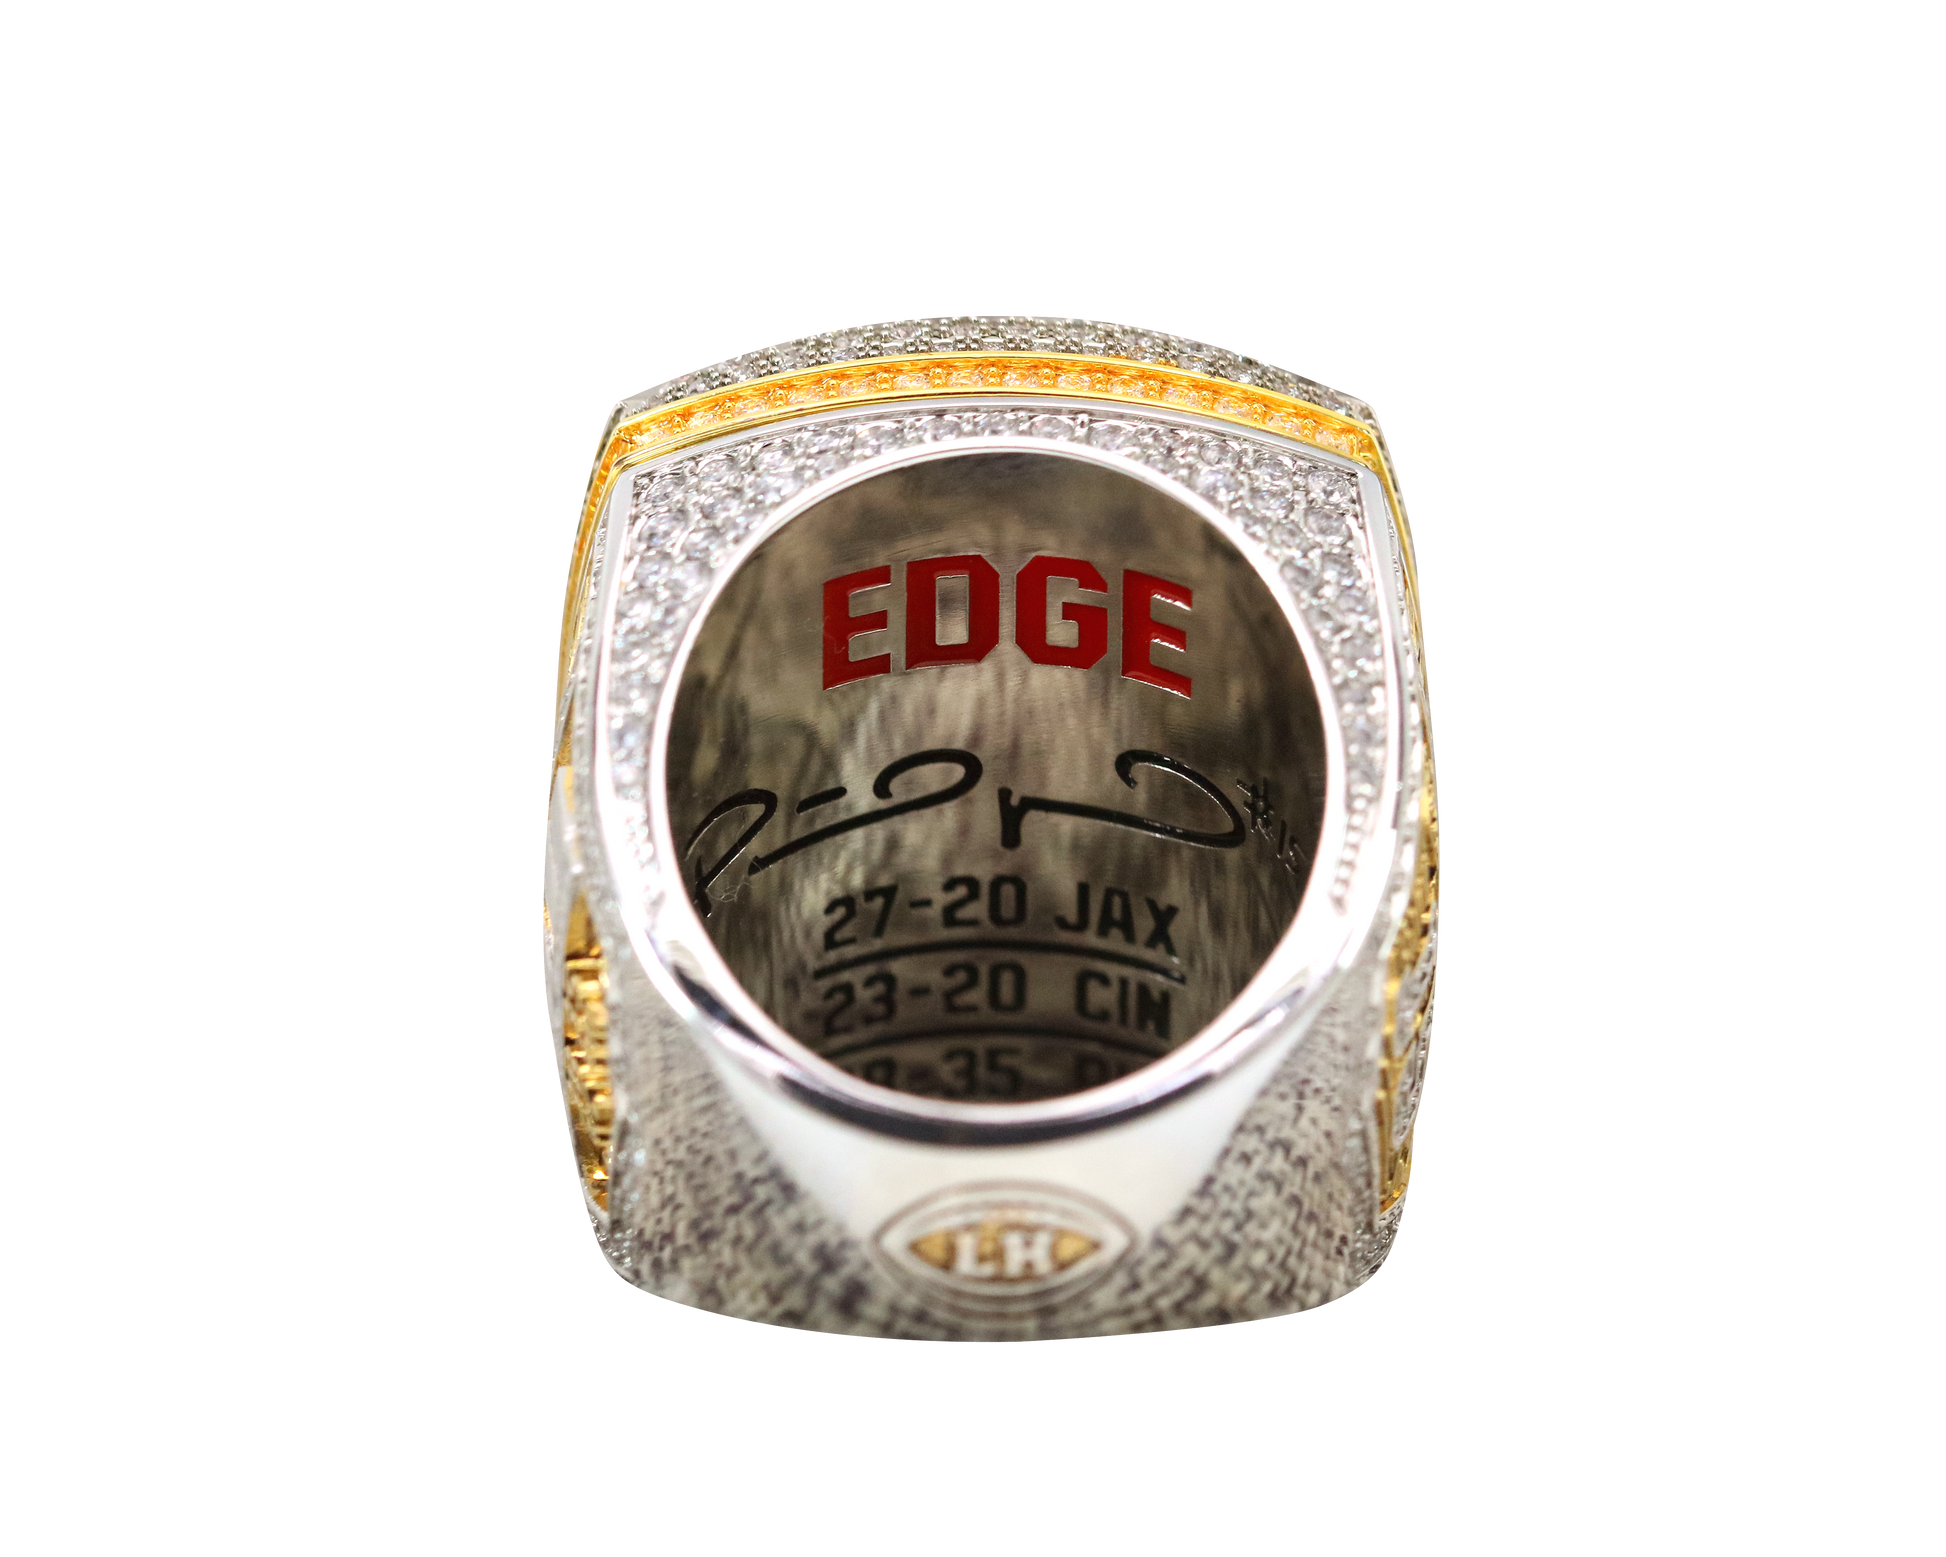 Chiefs Super Bowl LVII ring: first look at the jewelry - Arrowhead